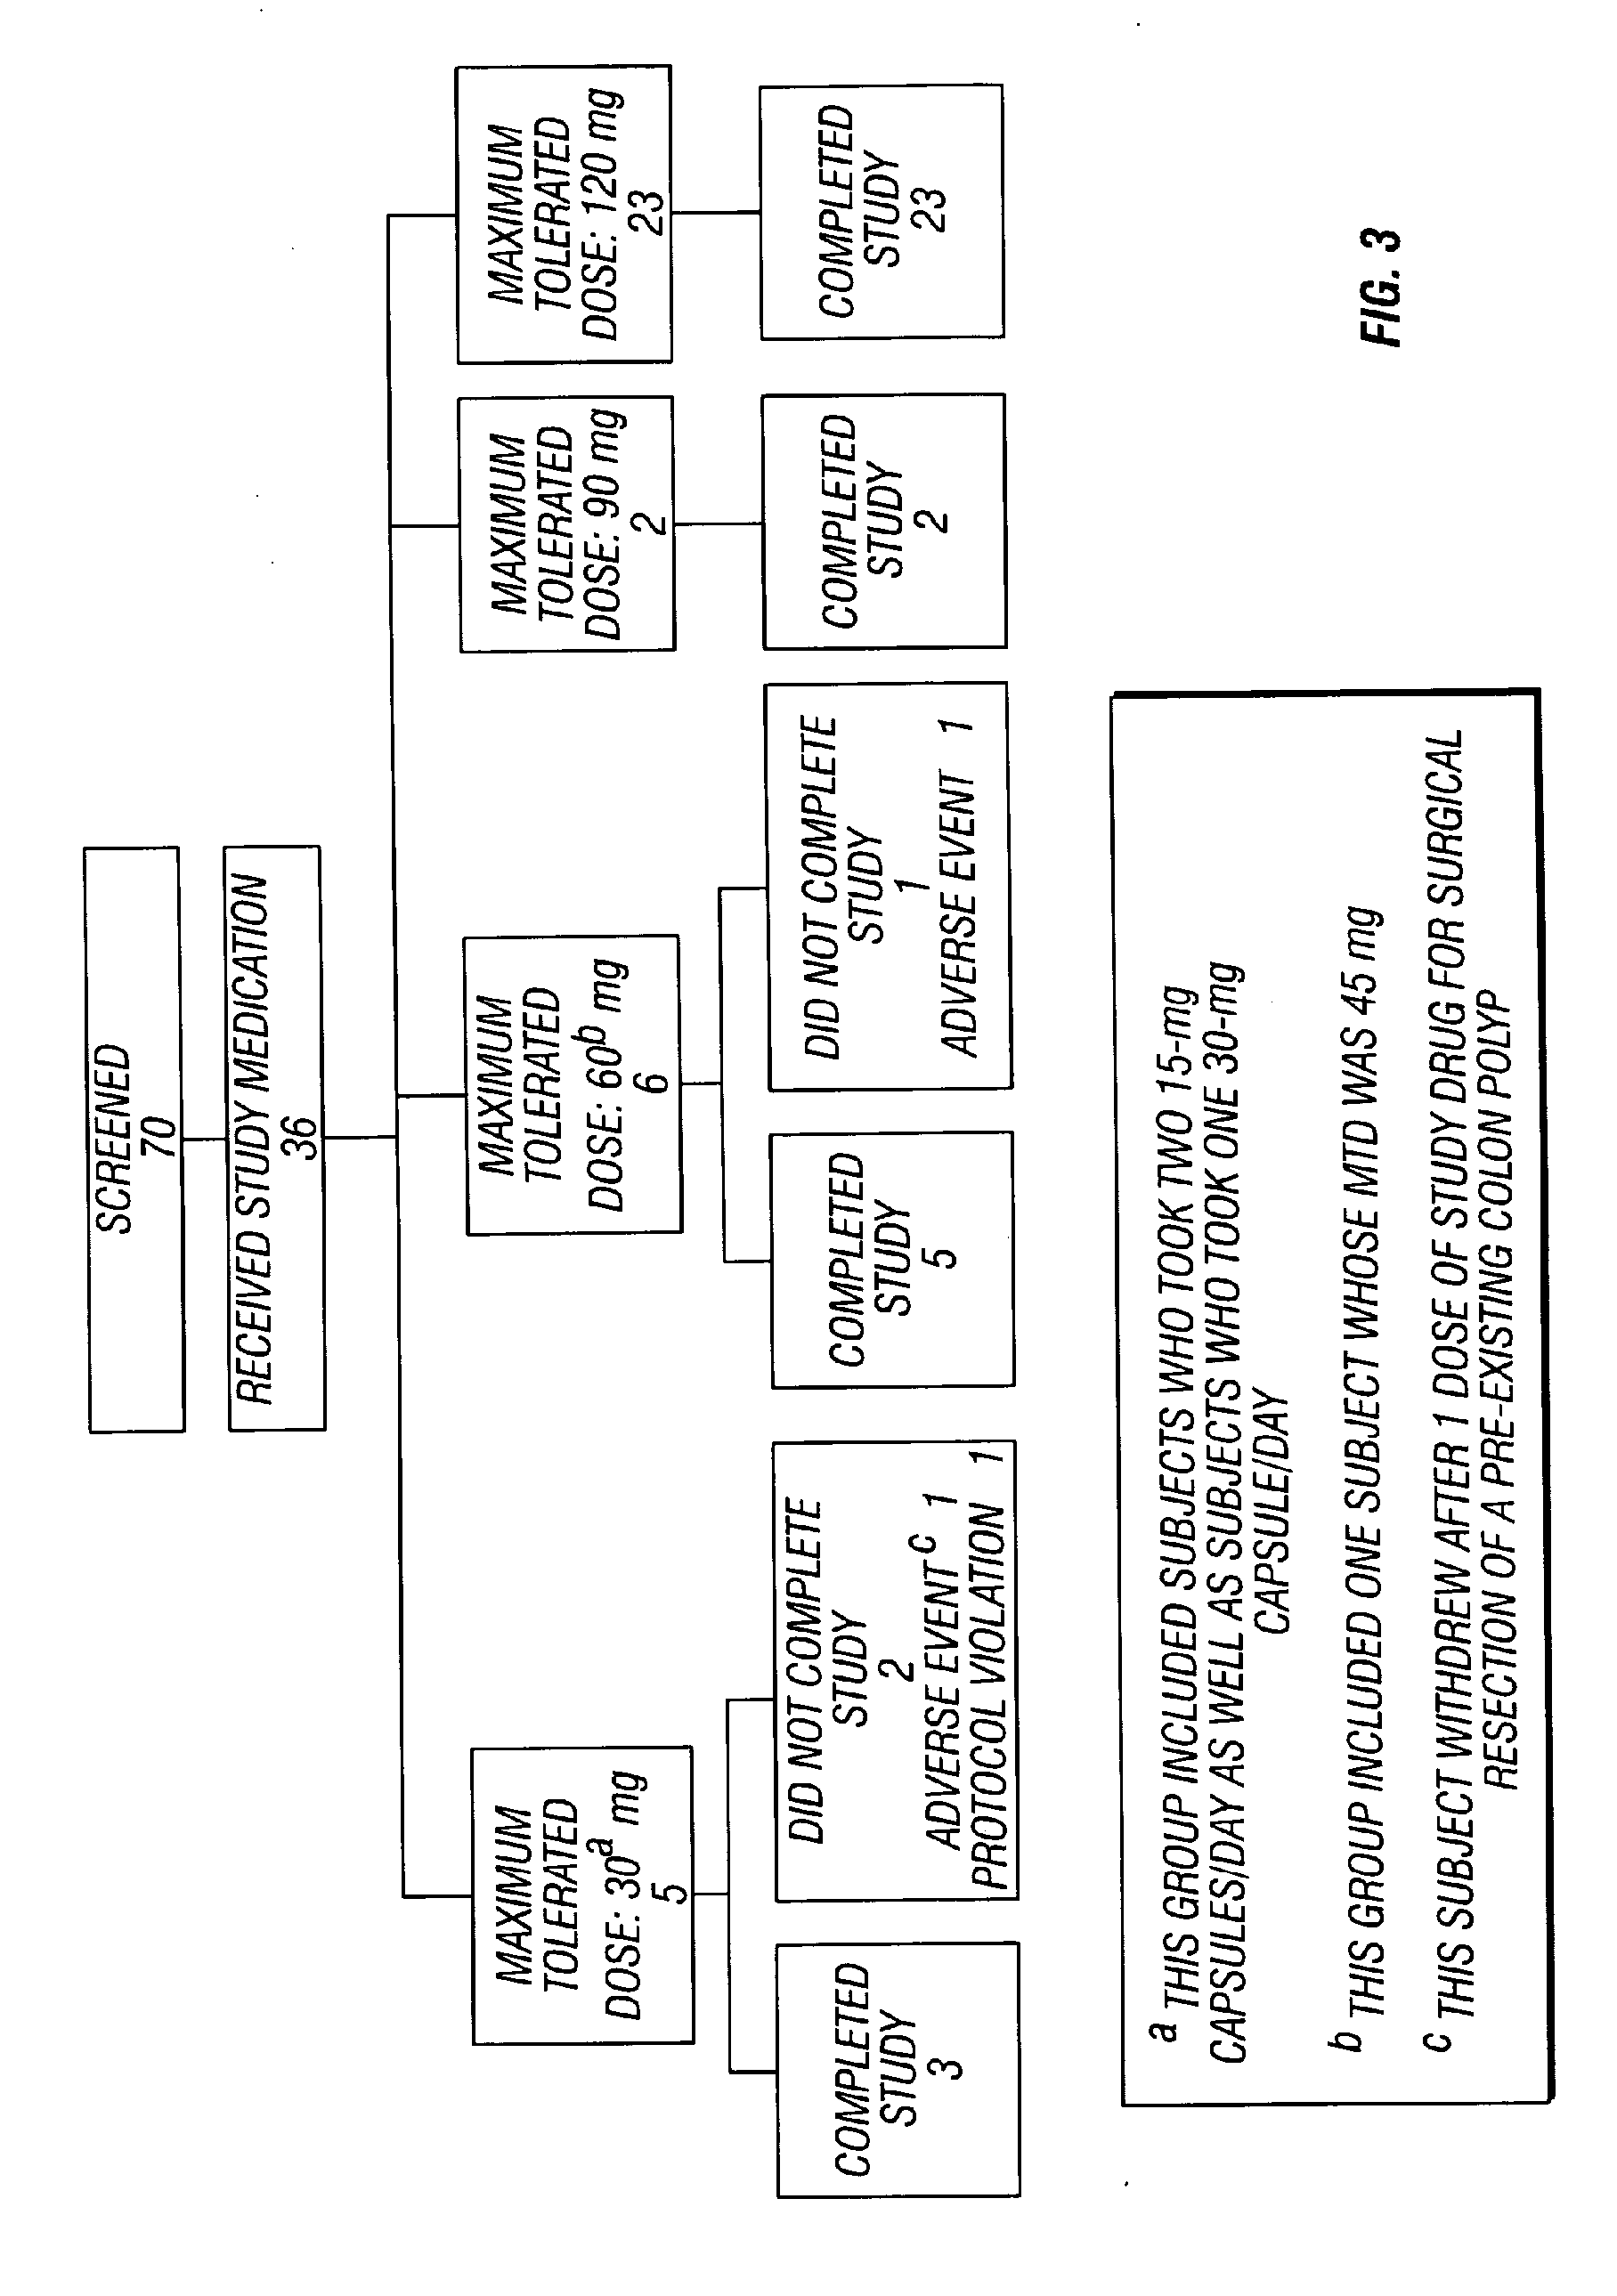 Pharmaceutical compositions comprising dextromethorphan and quinidine for the treatment of neurological disorders